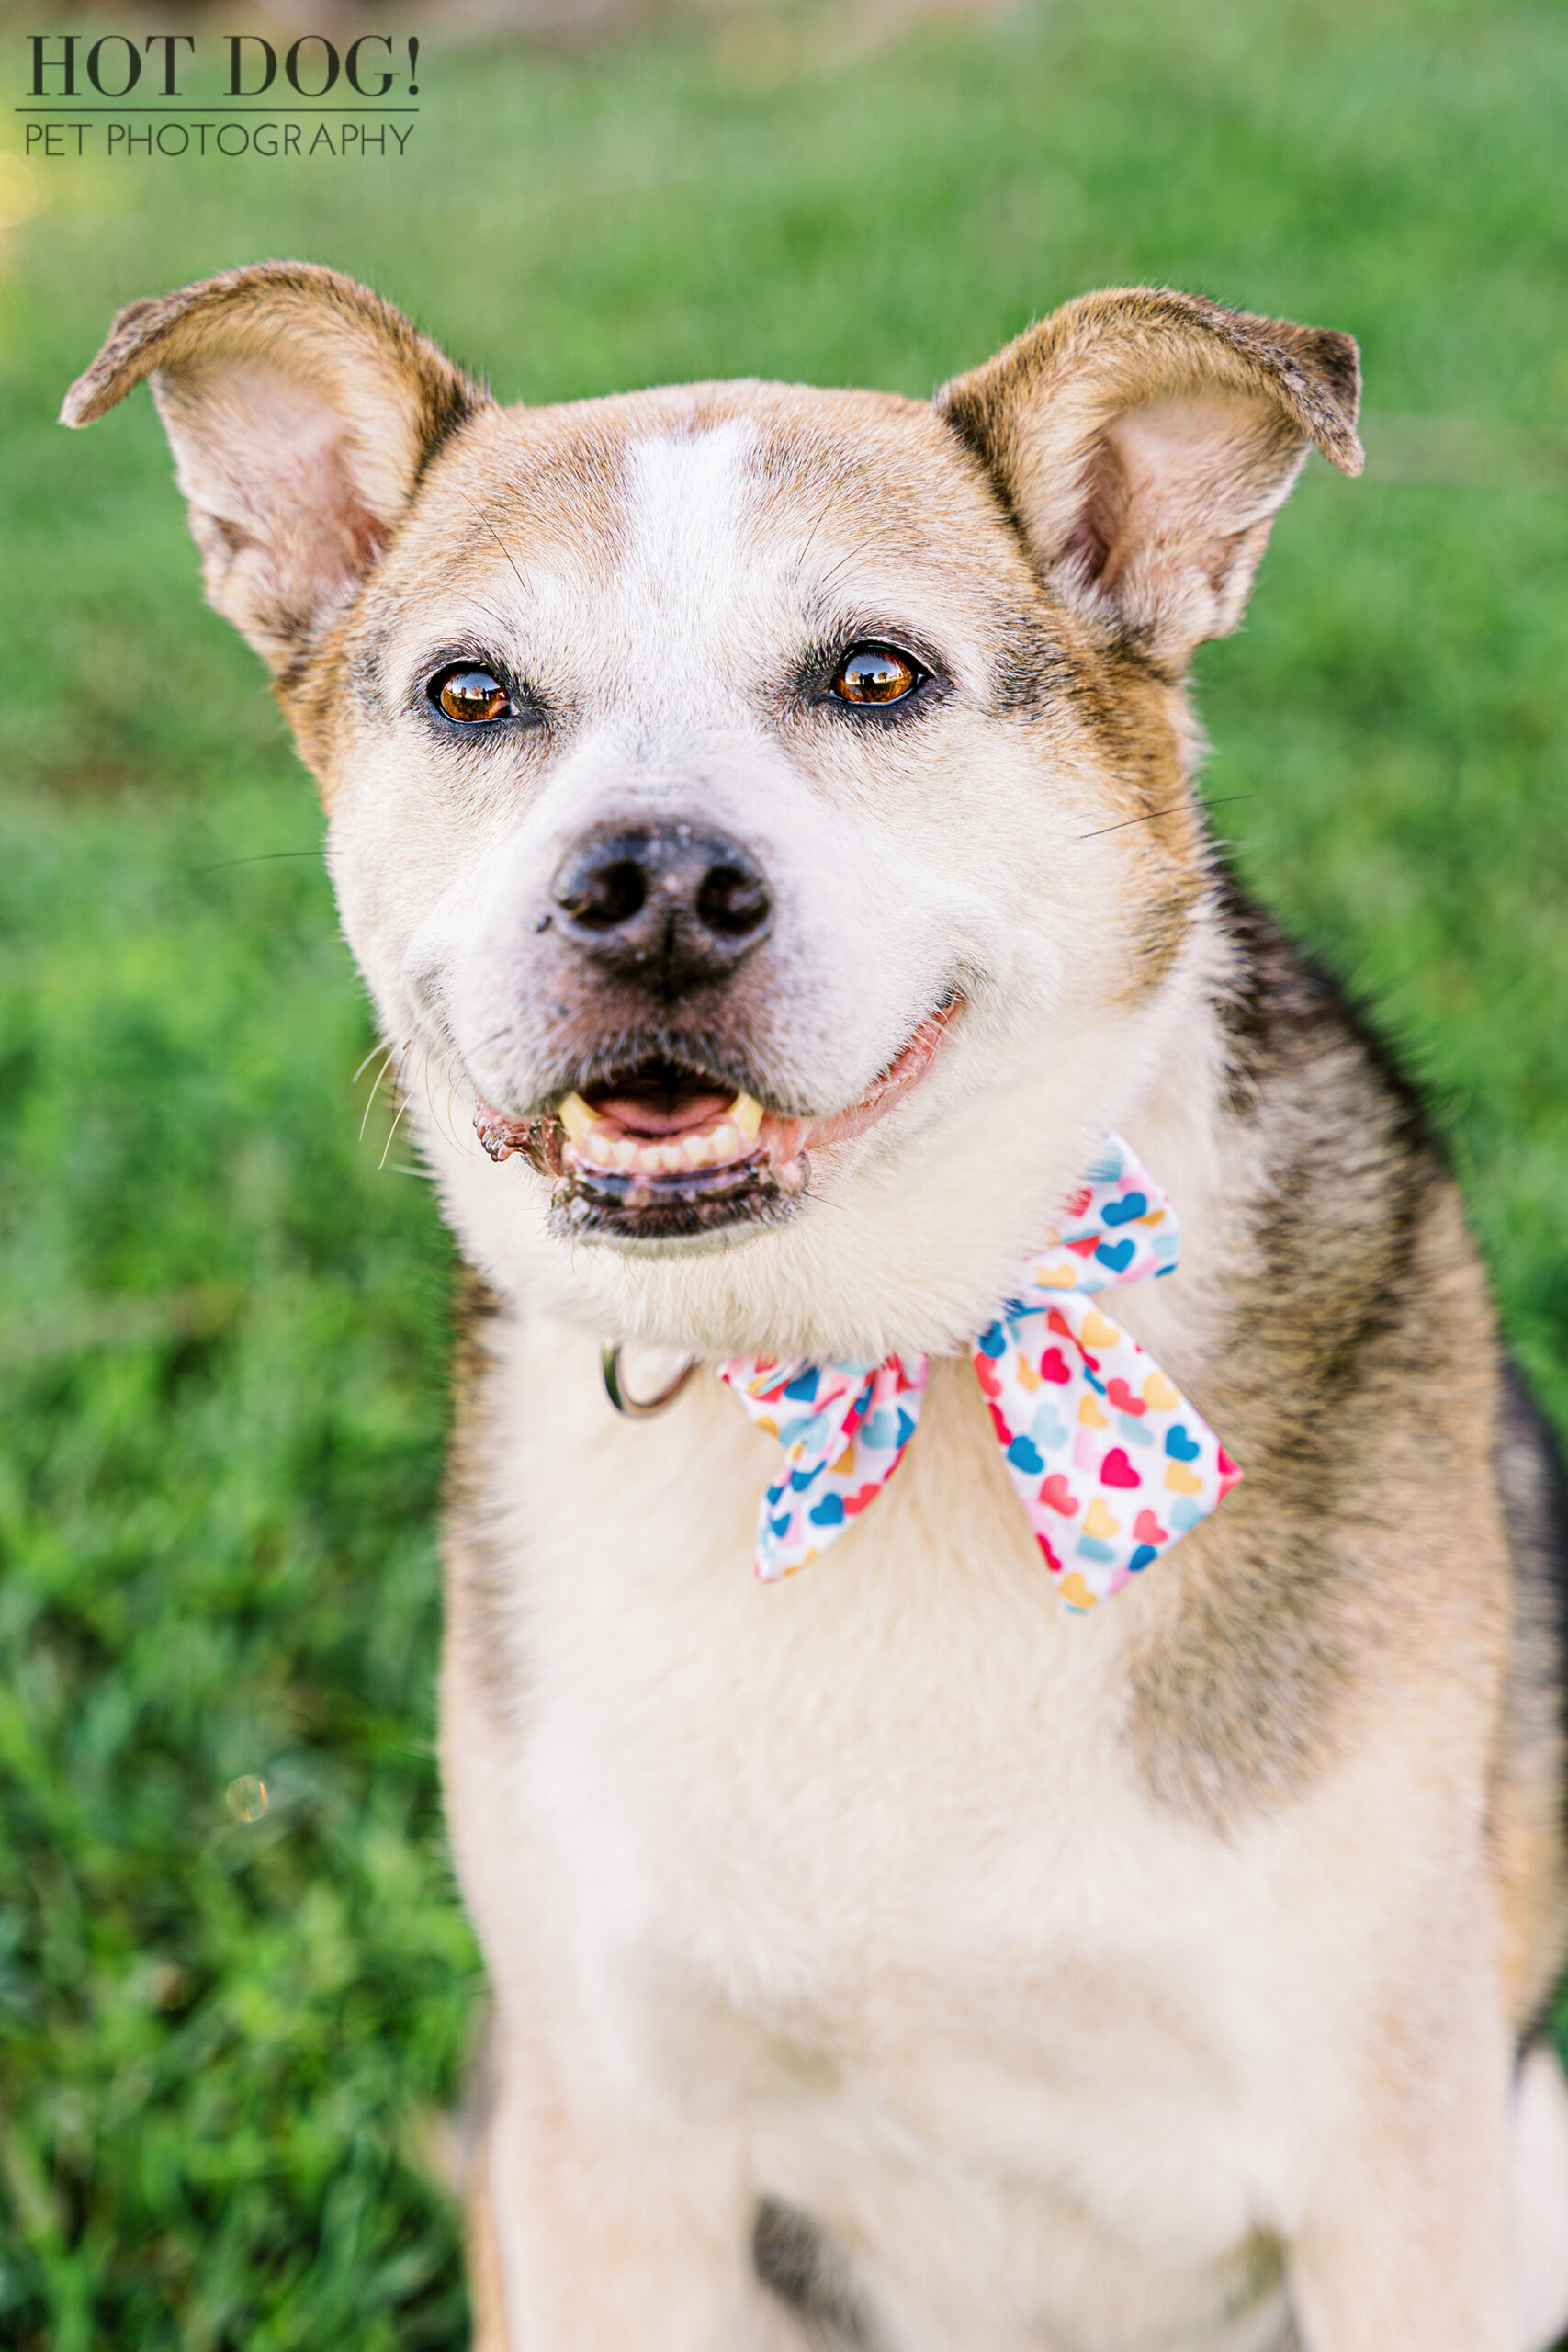 Sun Kissed Smile: Zoe's infectious grin brightens the day as she basks in the warm Florida sunshine in Newton Park. (Photo by Hot Dog! Pet Photography)